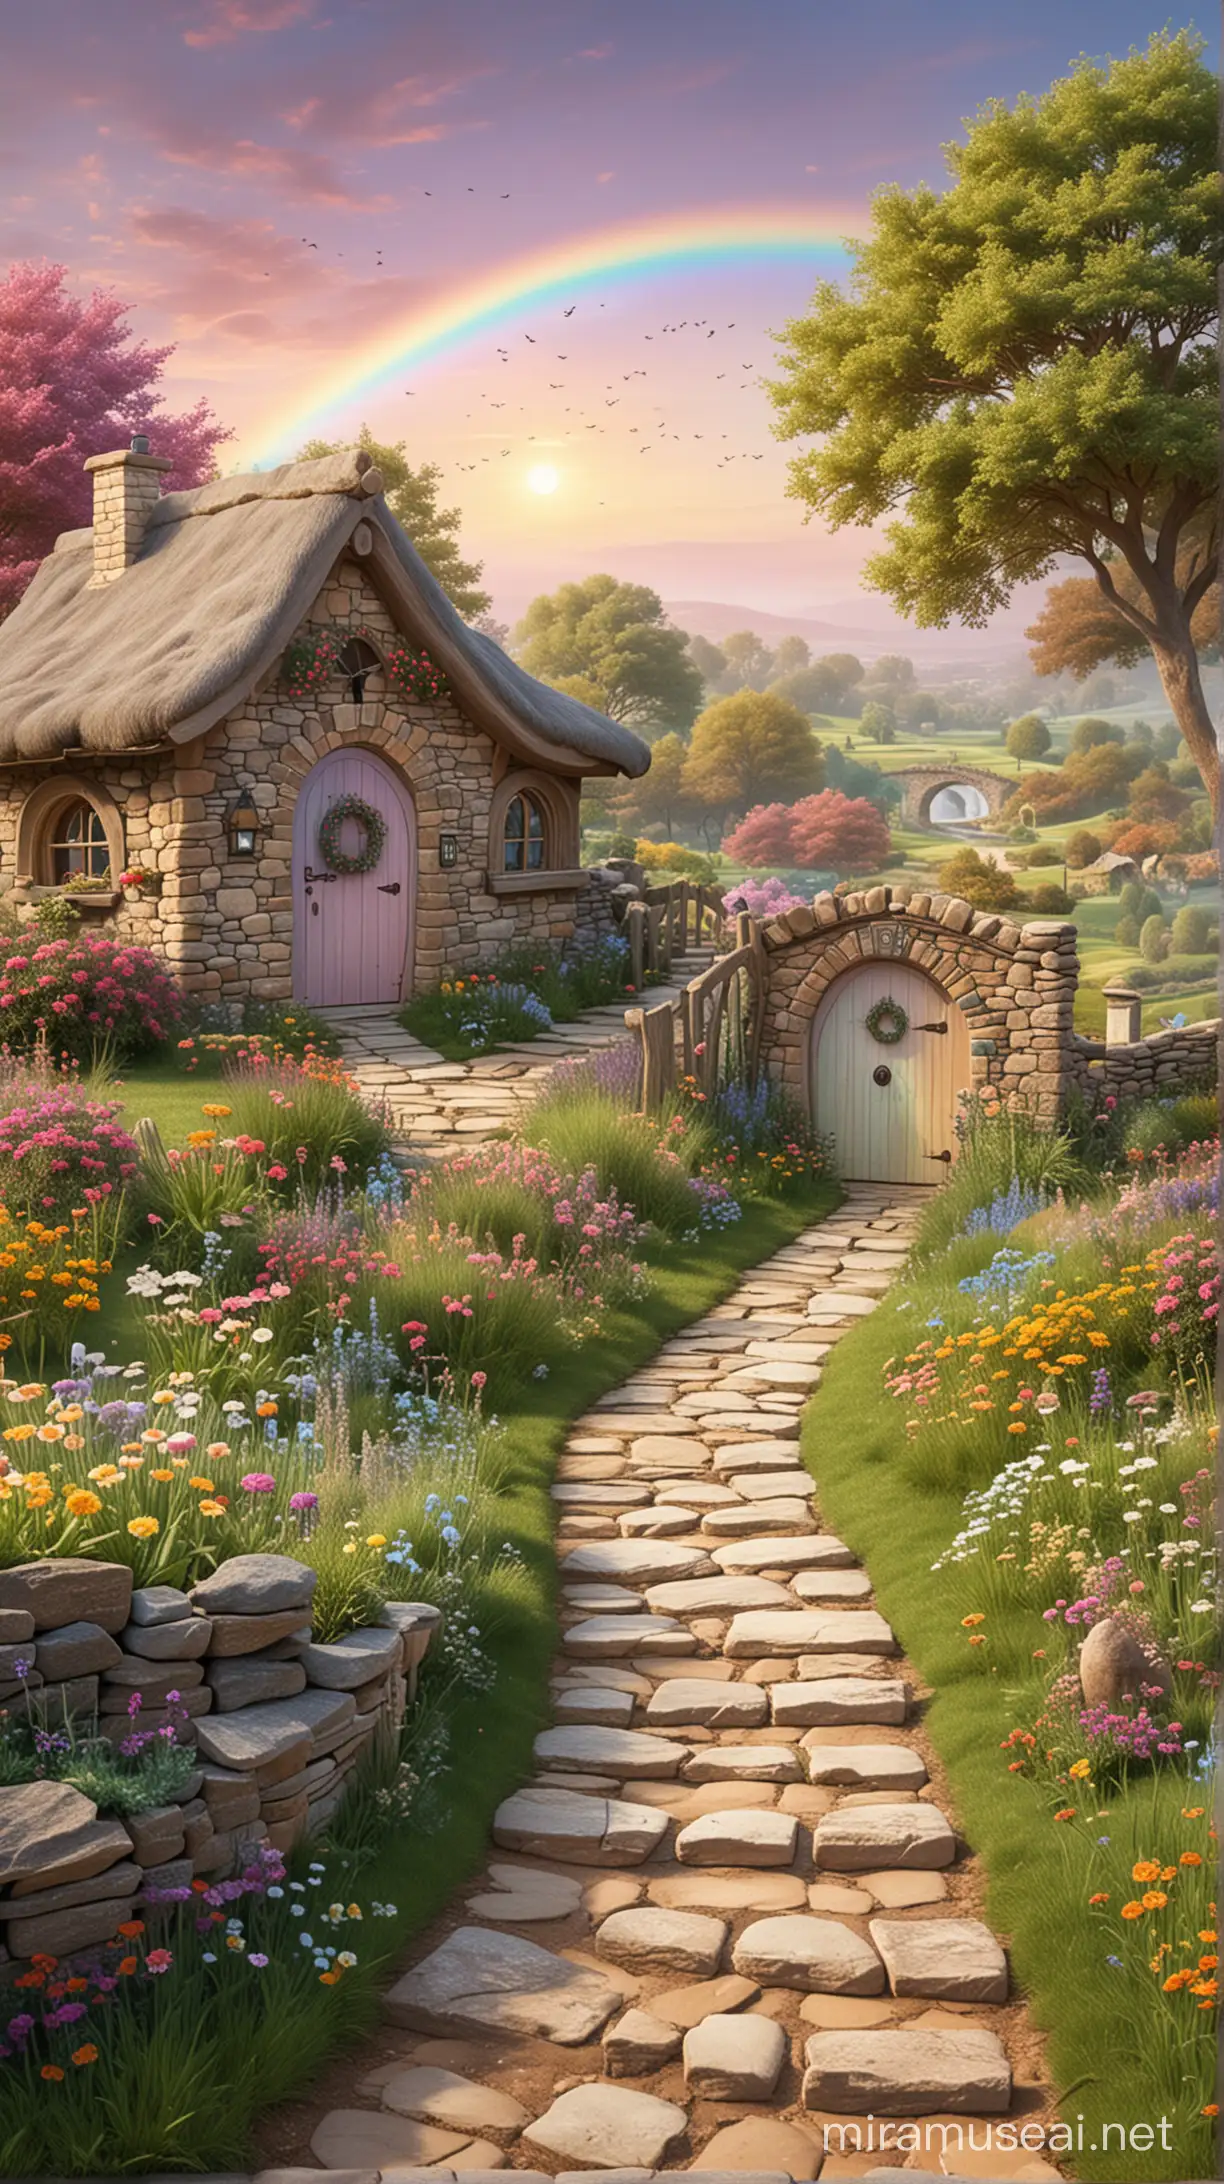 Whimsical Landscape with a pastel rainbow in the background in a shire with fairy doors and fantasy cottages. With a stone path and a stone bridge.